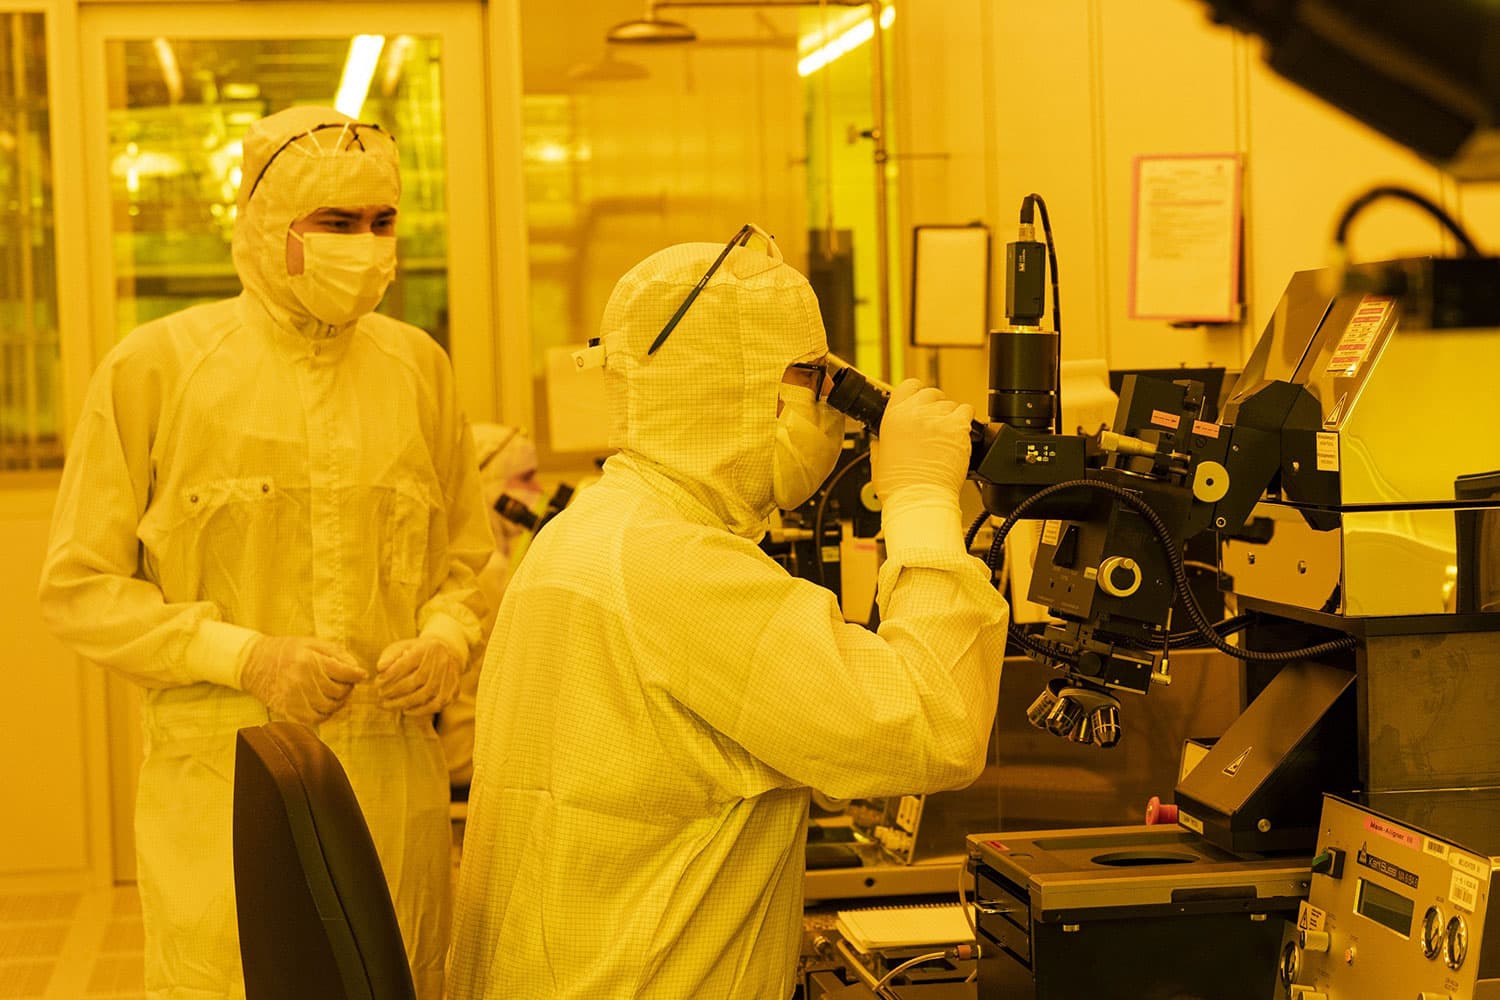 The germanium-tin processor was manufactured in the Helmholtz Nano Facility.